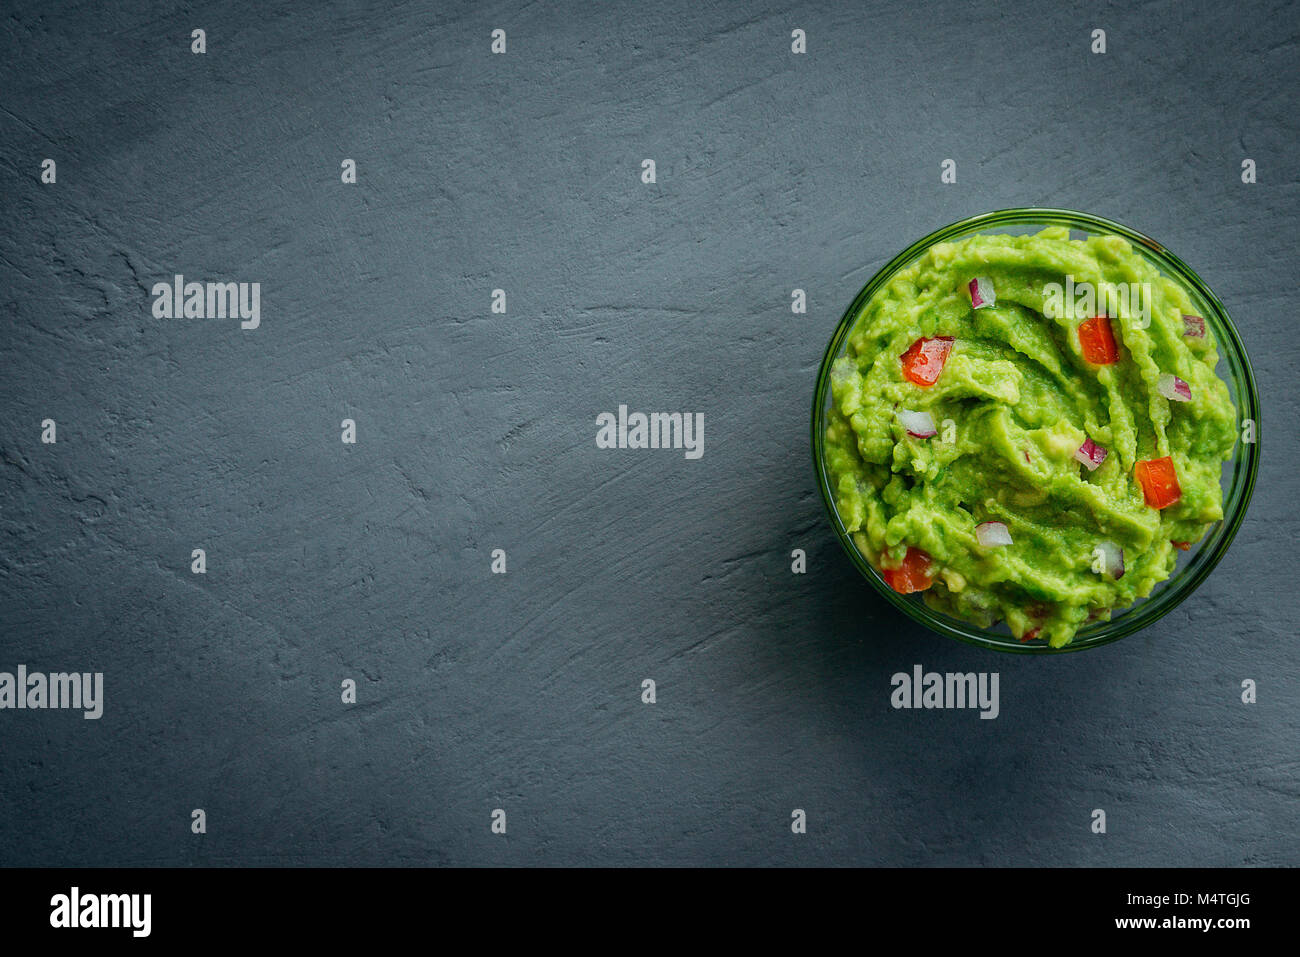 Guacamole bowl on a stone table. Top view image. Copyspace for your text. Stock Photo